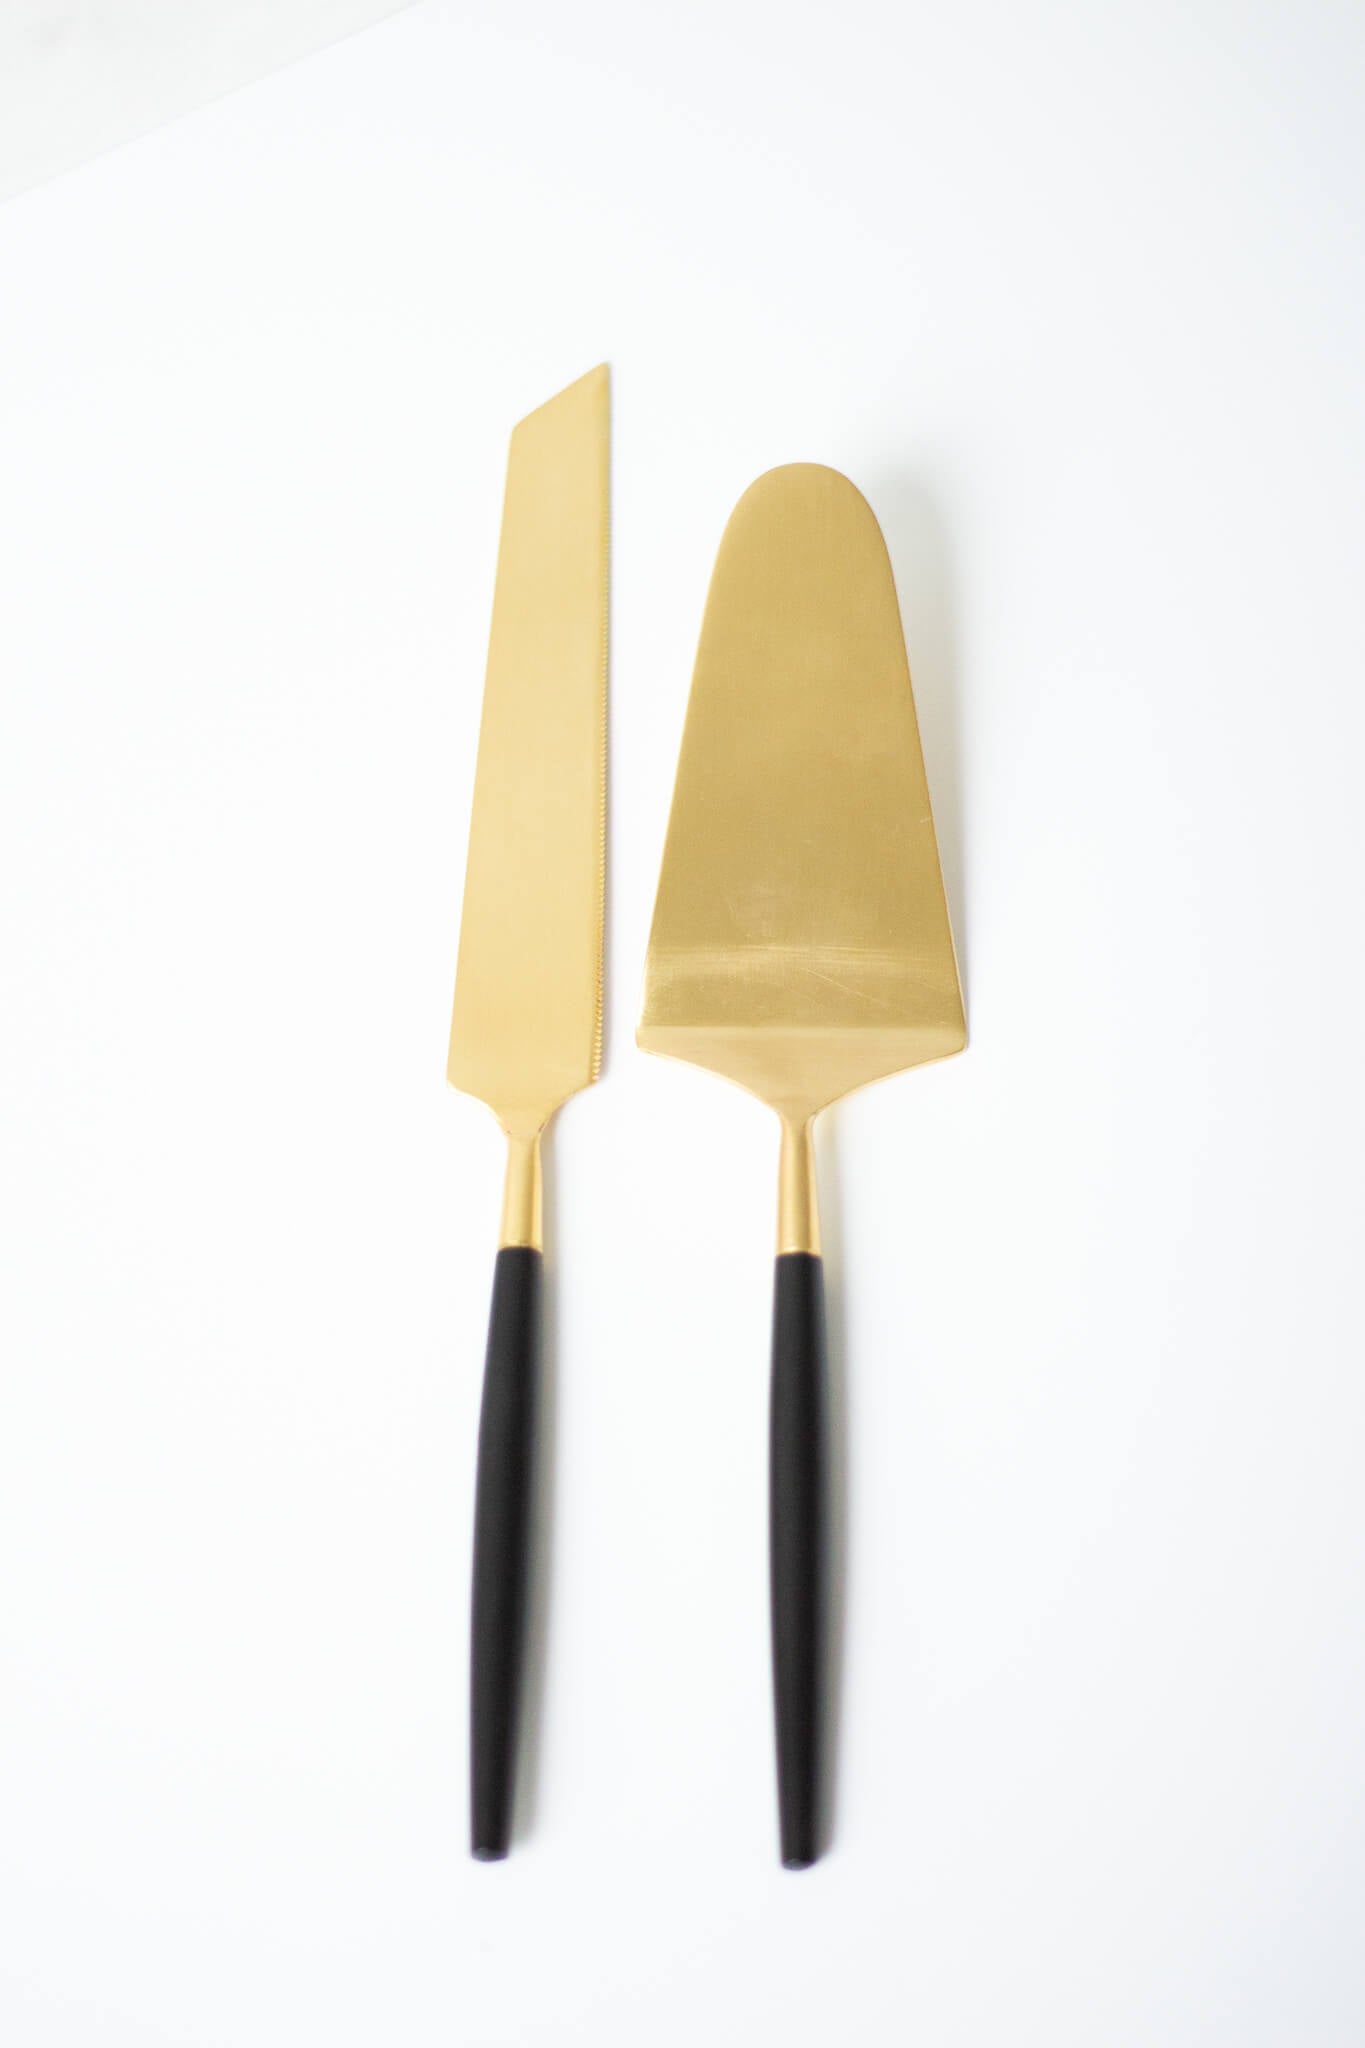 White & Gold Cake Lift & Knife Set – The Store at MAD